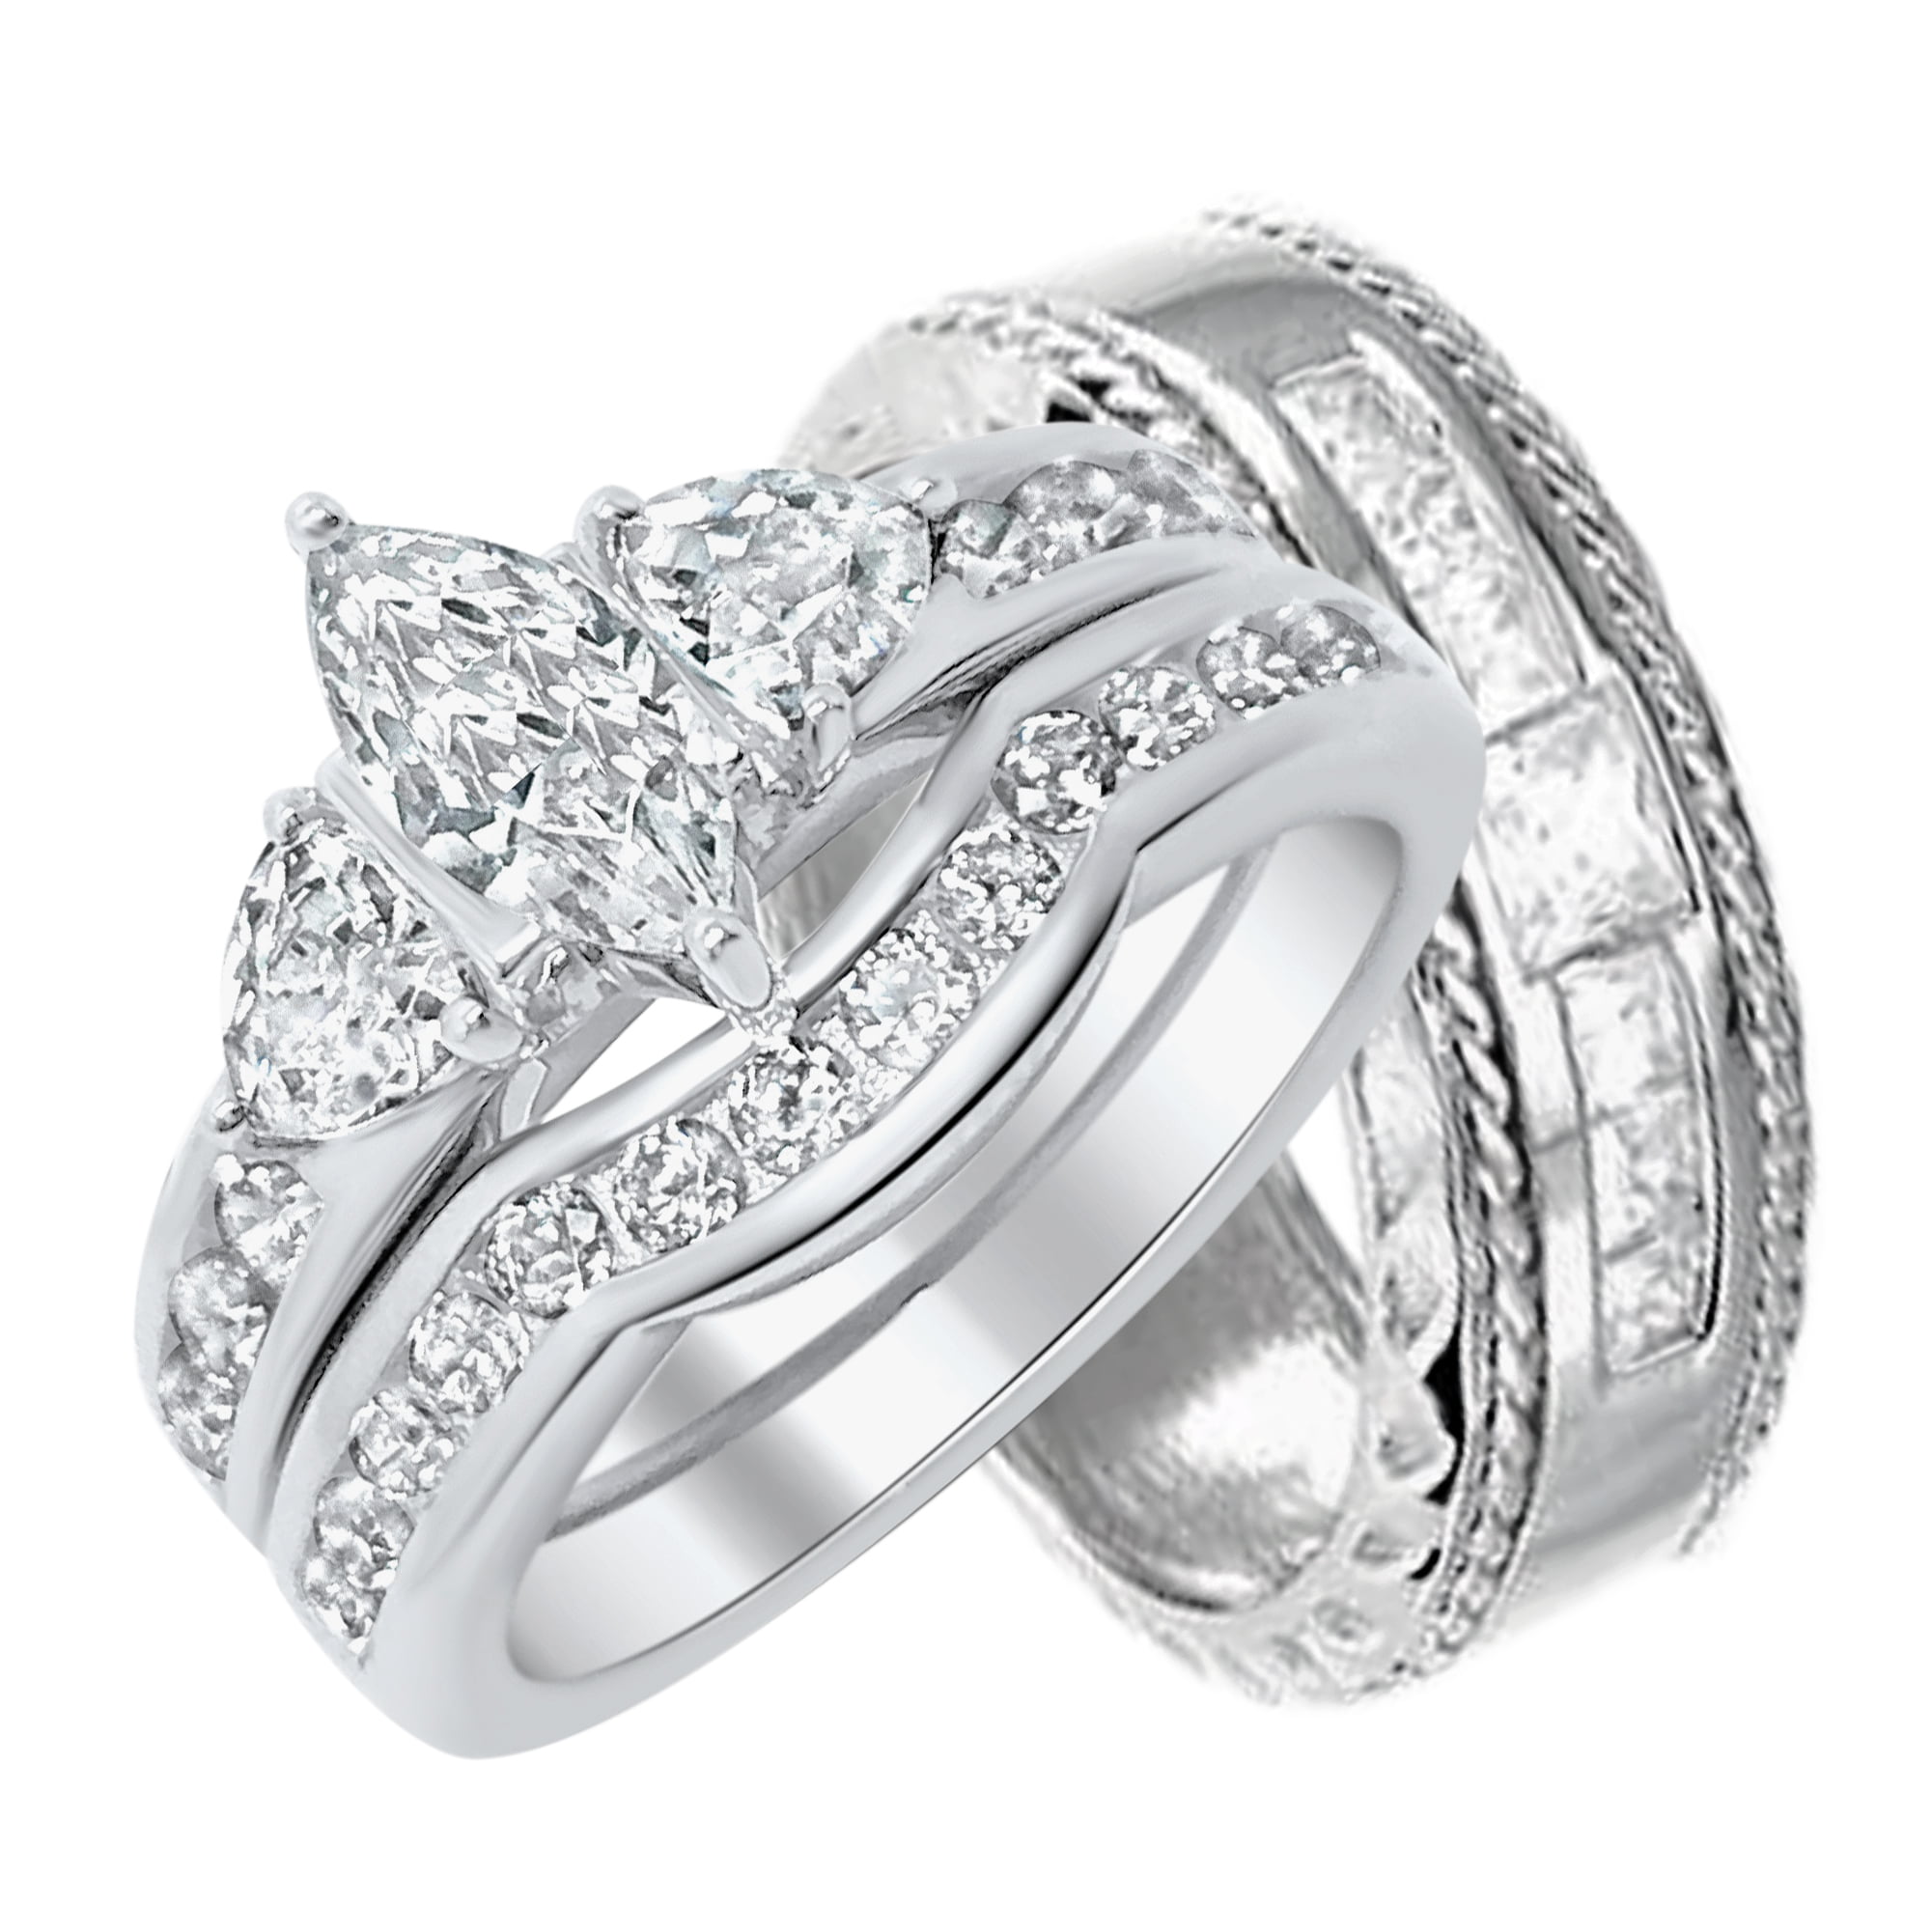 ANNIVERSARY WEDDING BAND 2CT PAVE SET .925 Sterling Silver Ring SIZES 7-10 